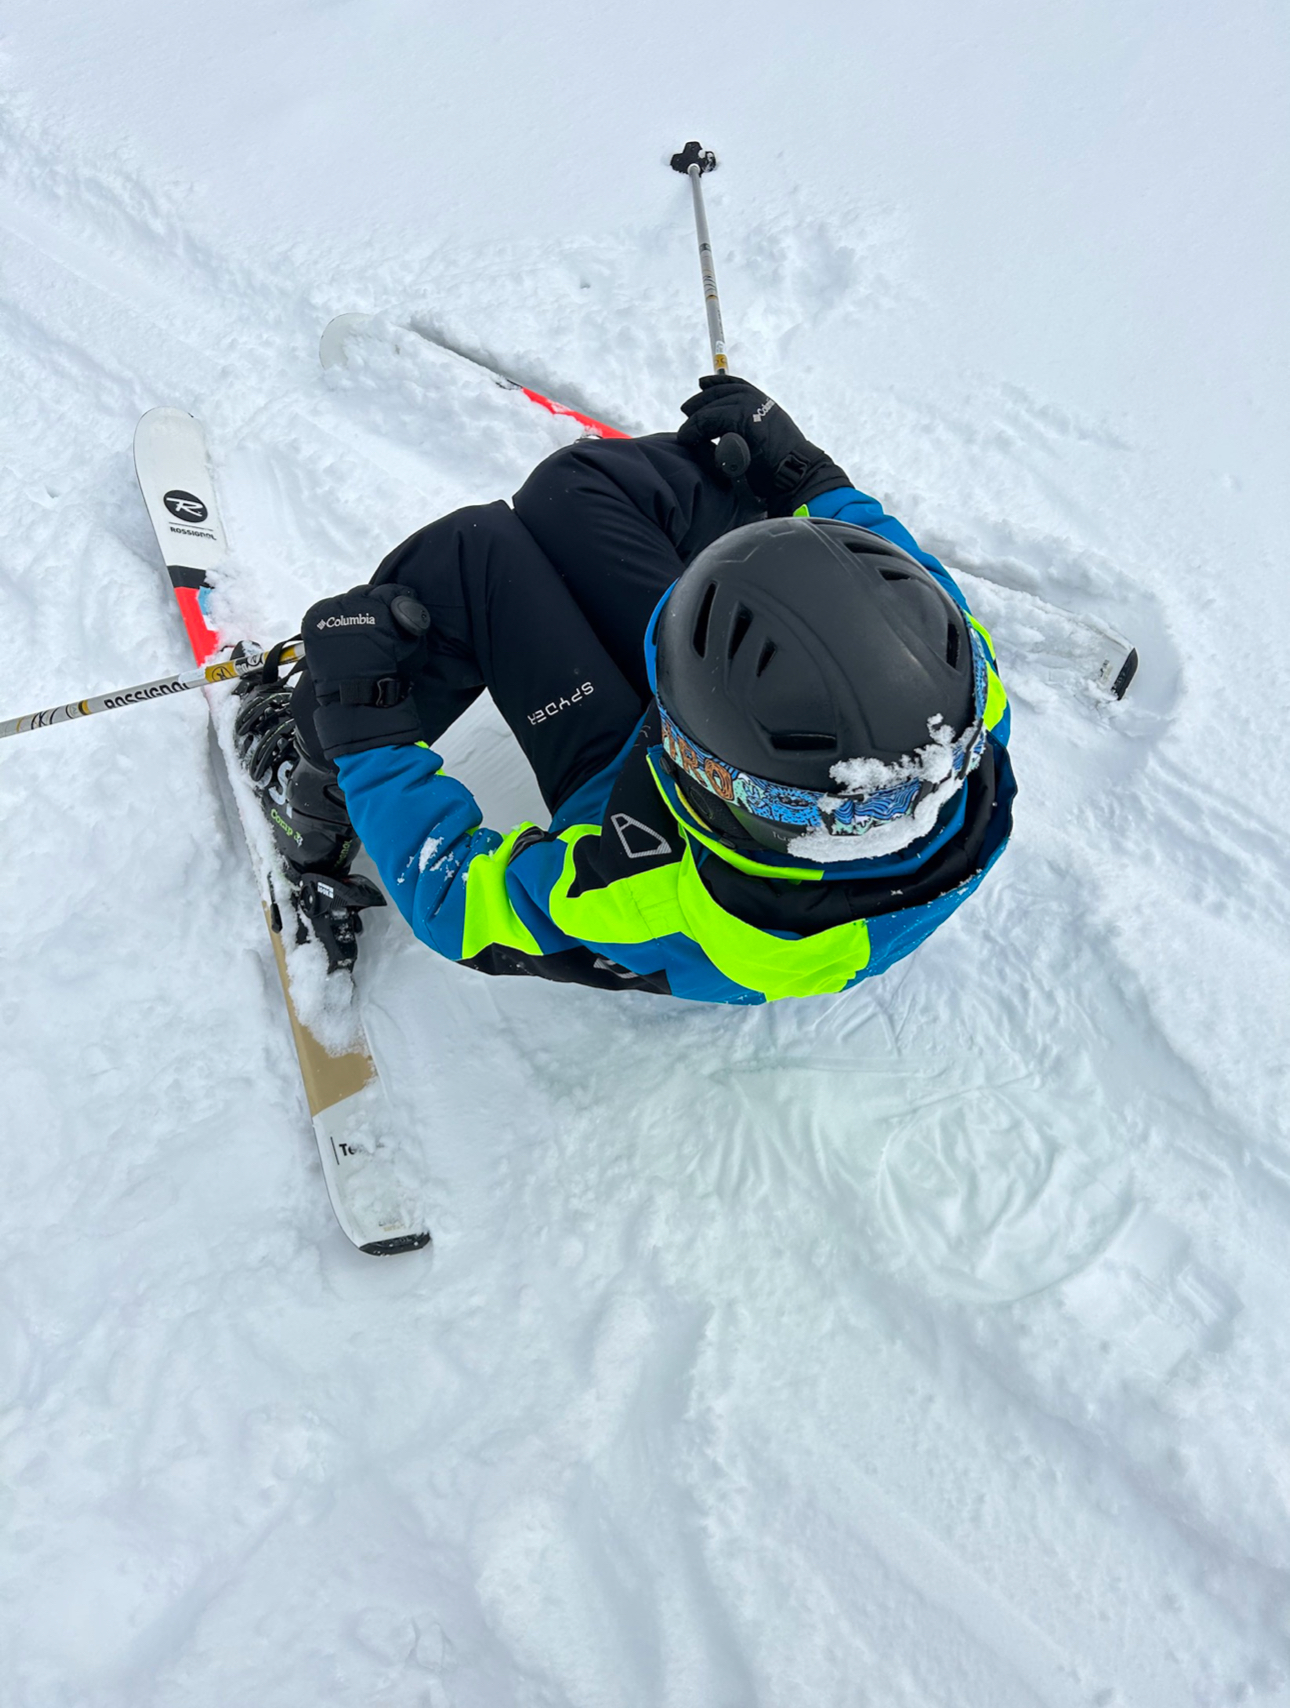 ski trip packing list for kids, what to pack for kids on a ski trip, where to buy kids ski clothing, ski clothing for kids